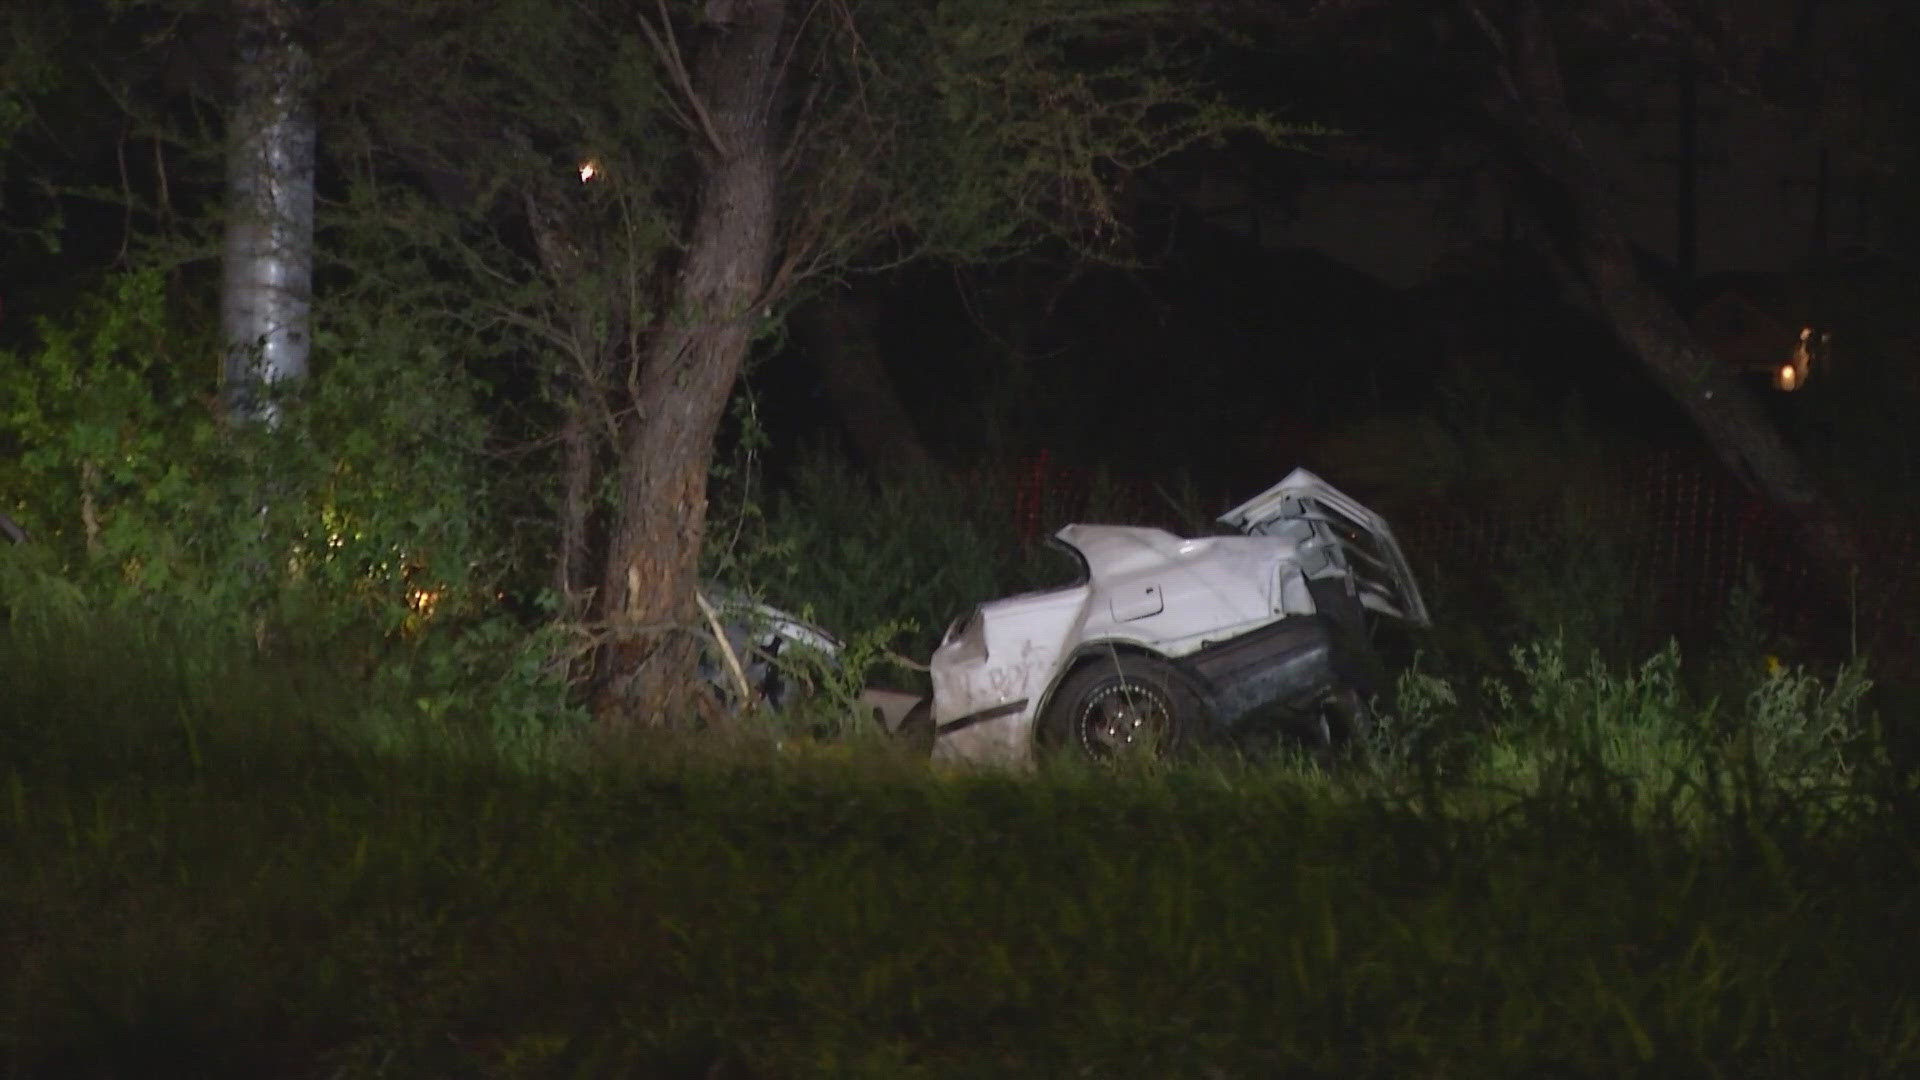 Police say the driver lost control and hit a utility pole before wrapping around a tree.